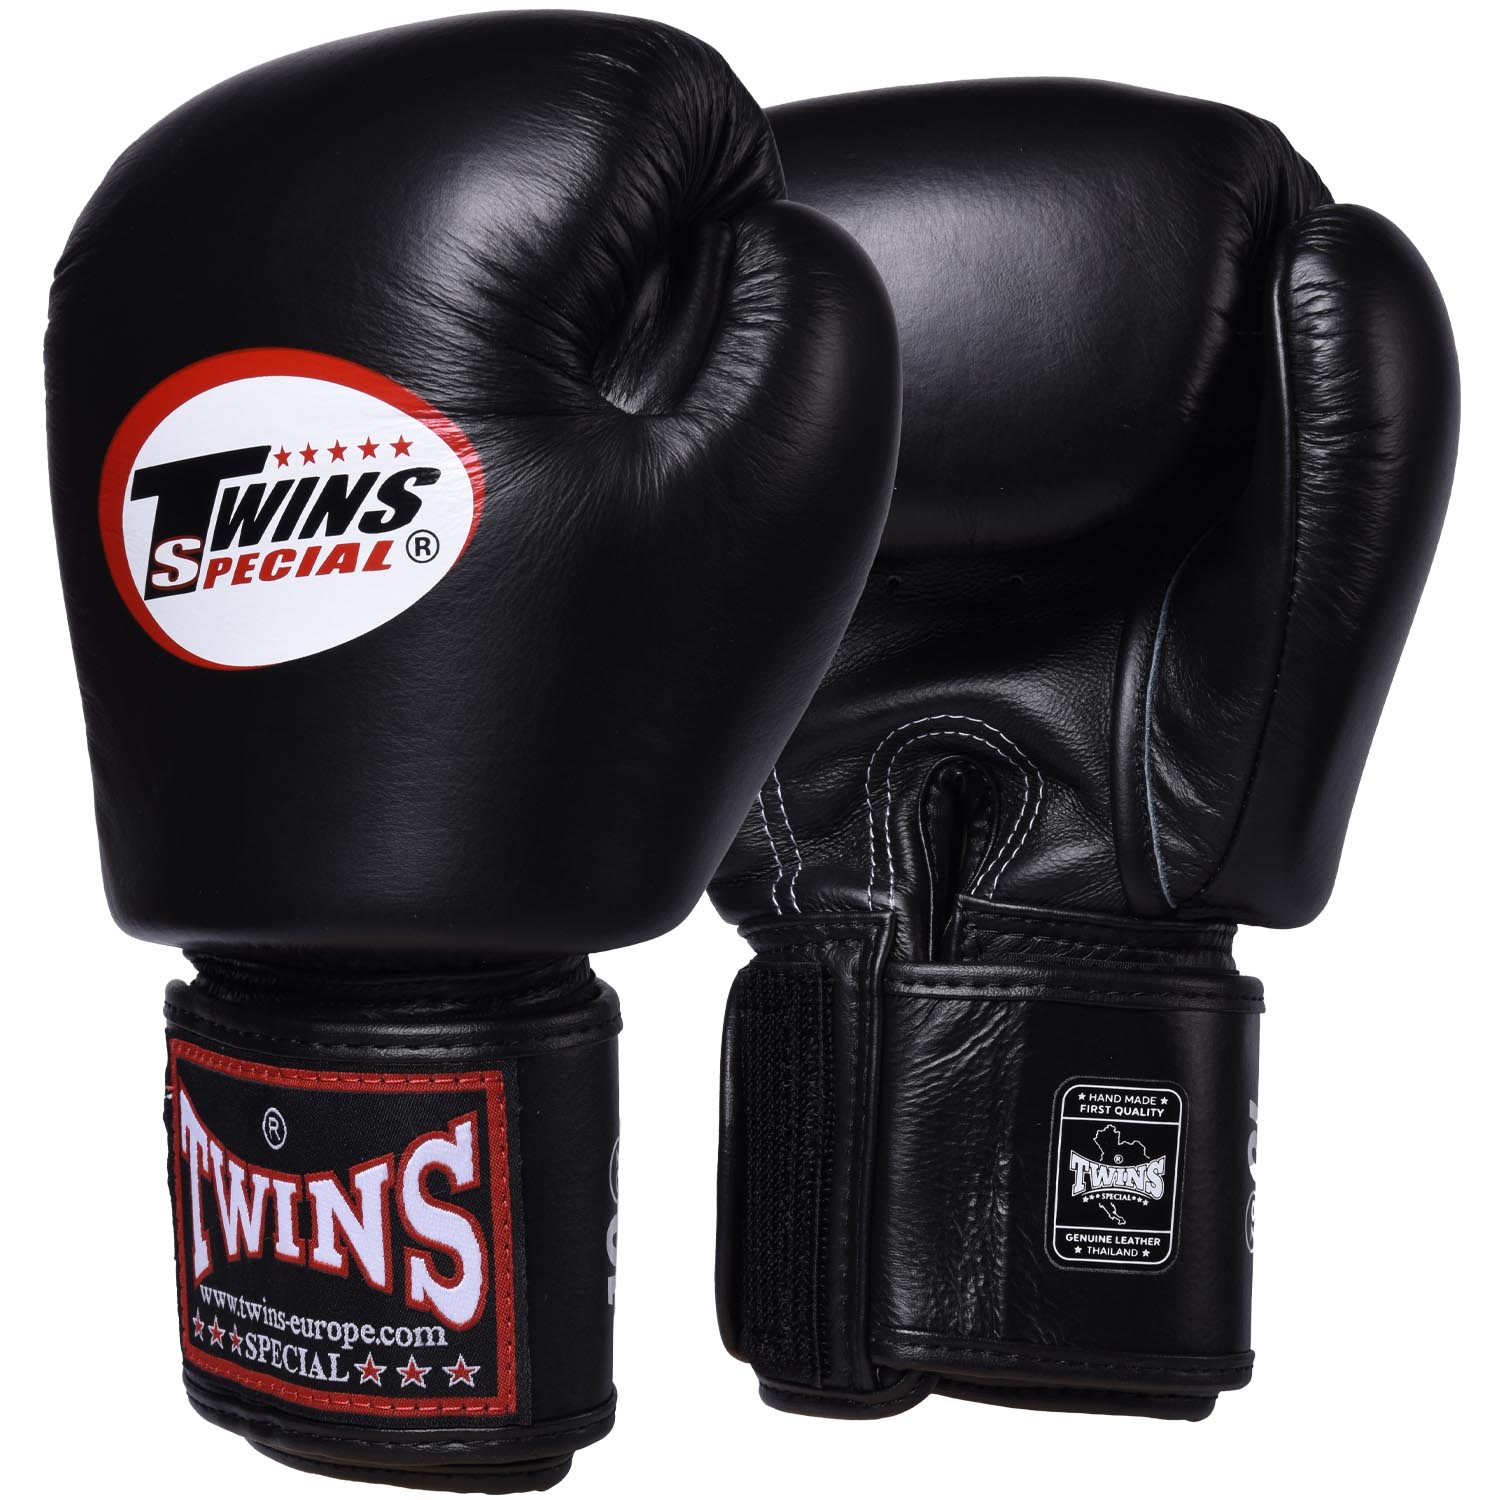 TWINS Special Boxing Gloves, Leather, BGVL-3, black, 10 Oz